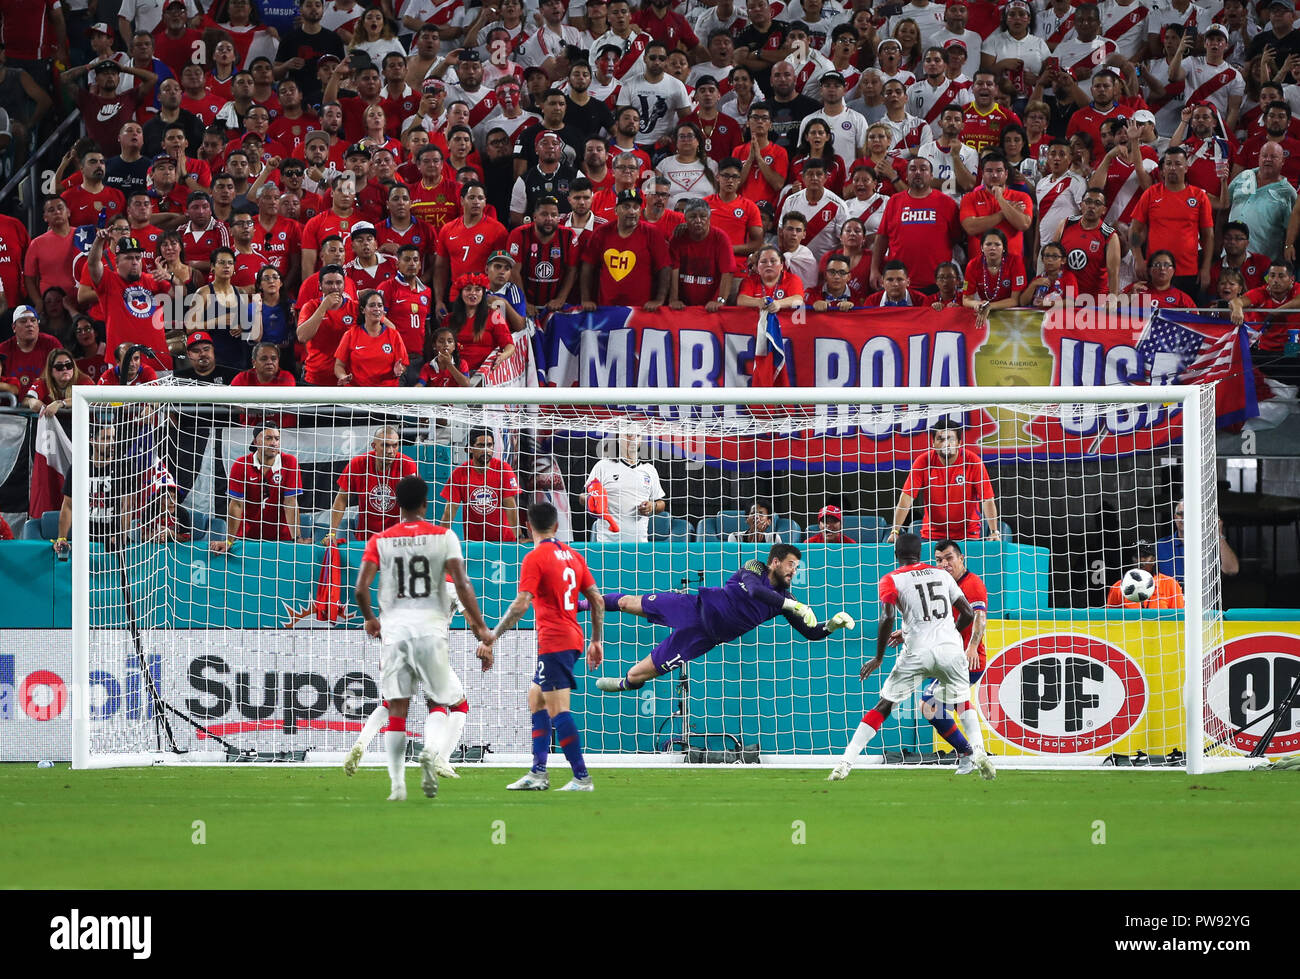 Miami Gardens, Florida, USA. 12th Oct, 2018. Chile goalkeeper FERNANDO DE PAUL (12) leaps to save a shot to goal during an international friendly match between the Peru and Chile national soccer teams, at the Hard Rock Stadium in Miami Gardens, Florida. Credit: Mario Houben/ZUMA Wire/Alamy Live News Stock Photo